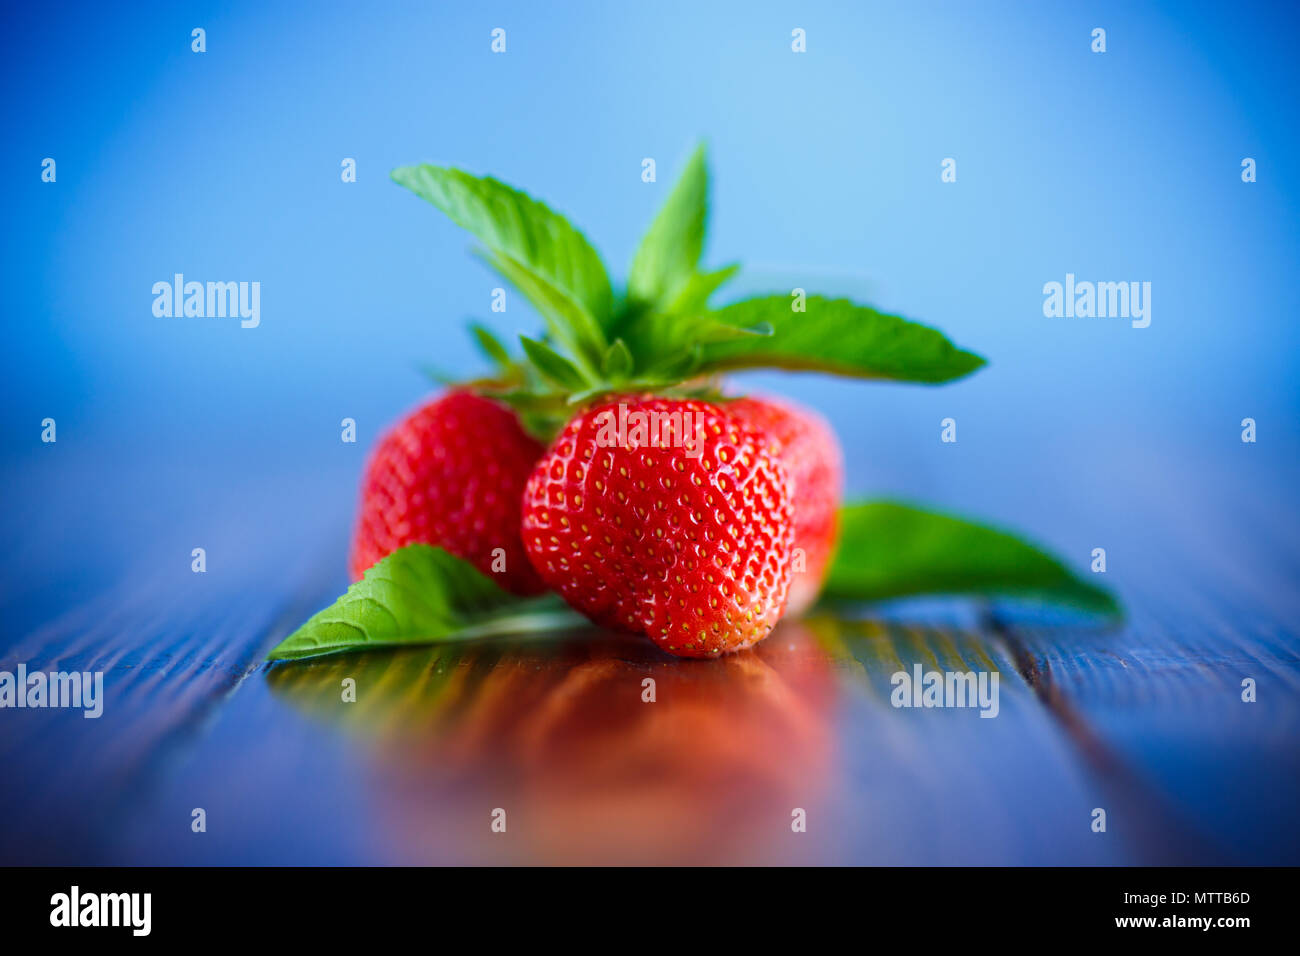 ripe red organic strawberry on a blue background Stock Photo